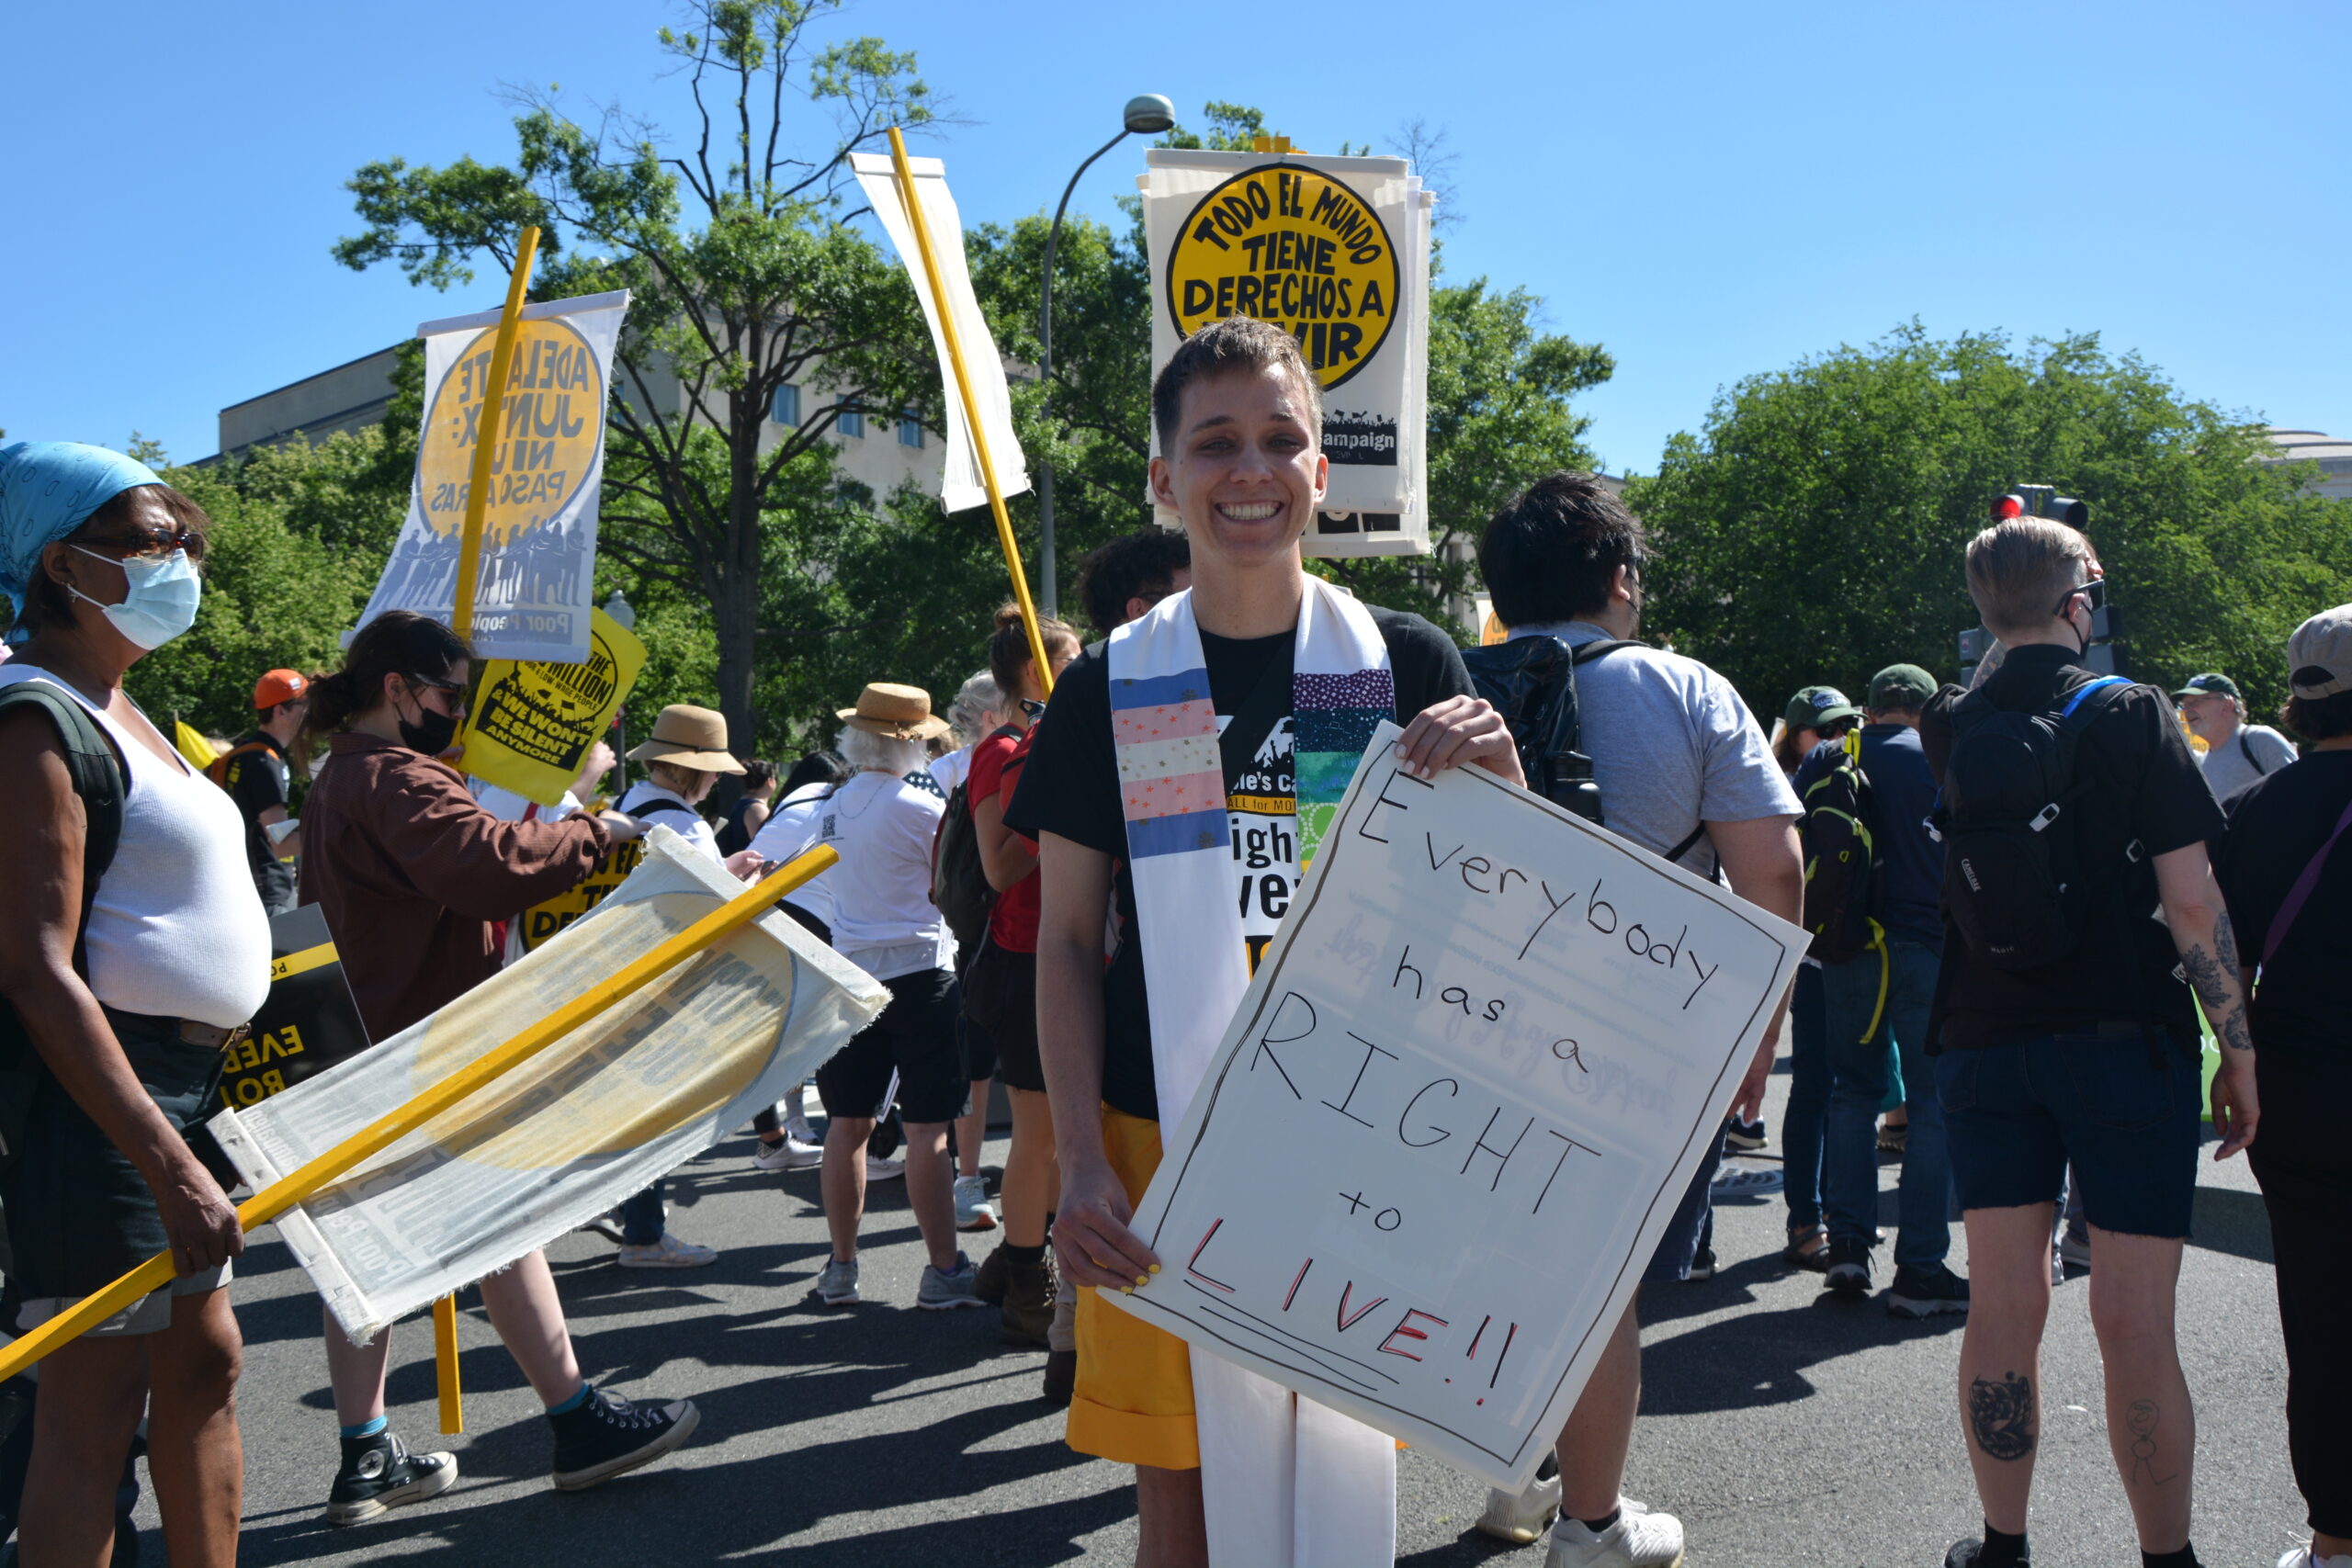 Elijah Anthony, from Boston, attends the Poor People's Campaign's "Mass Poor People’s & Low-Wage Workers’ Assembly & Moral March in Washington" on June 18, 2022.